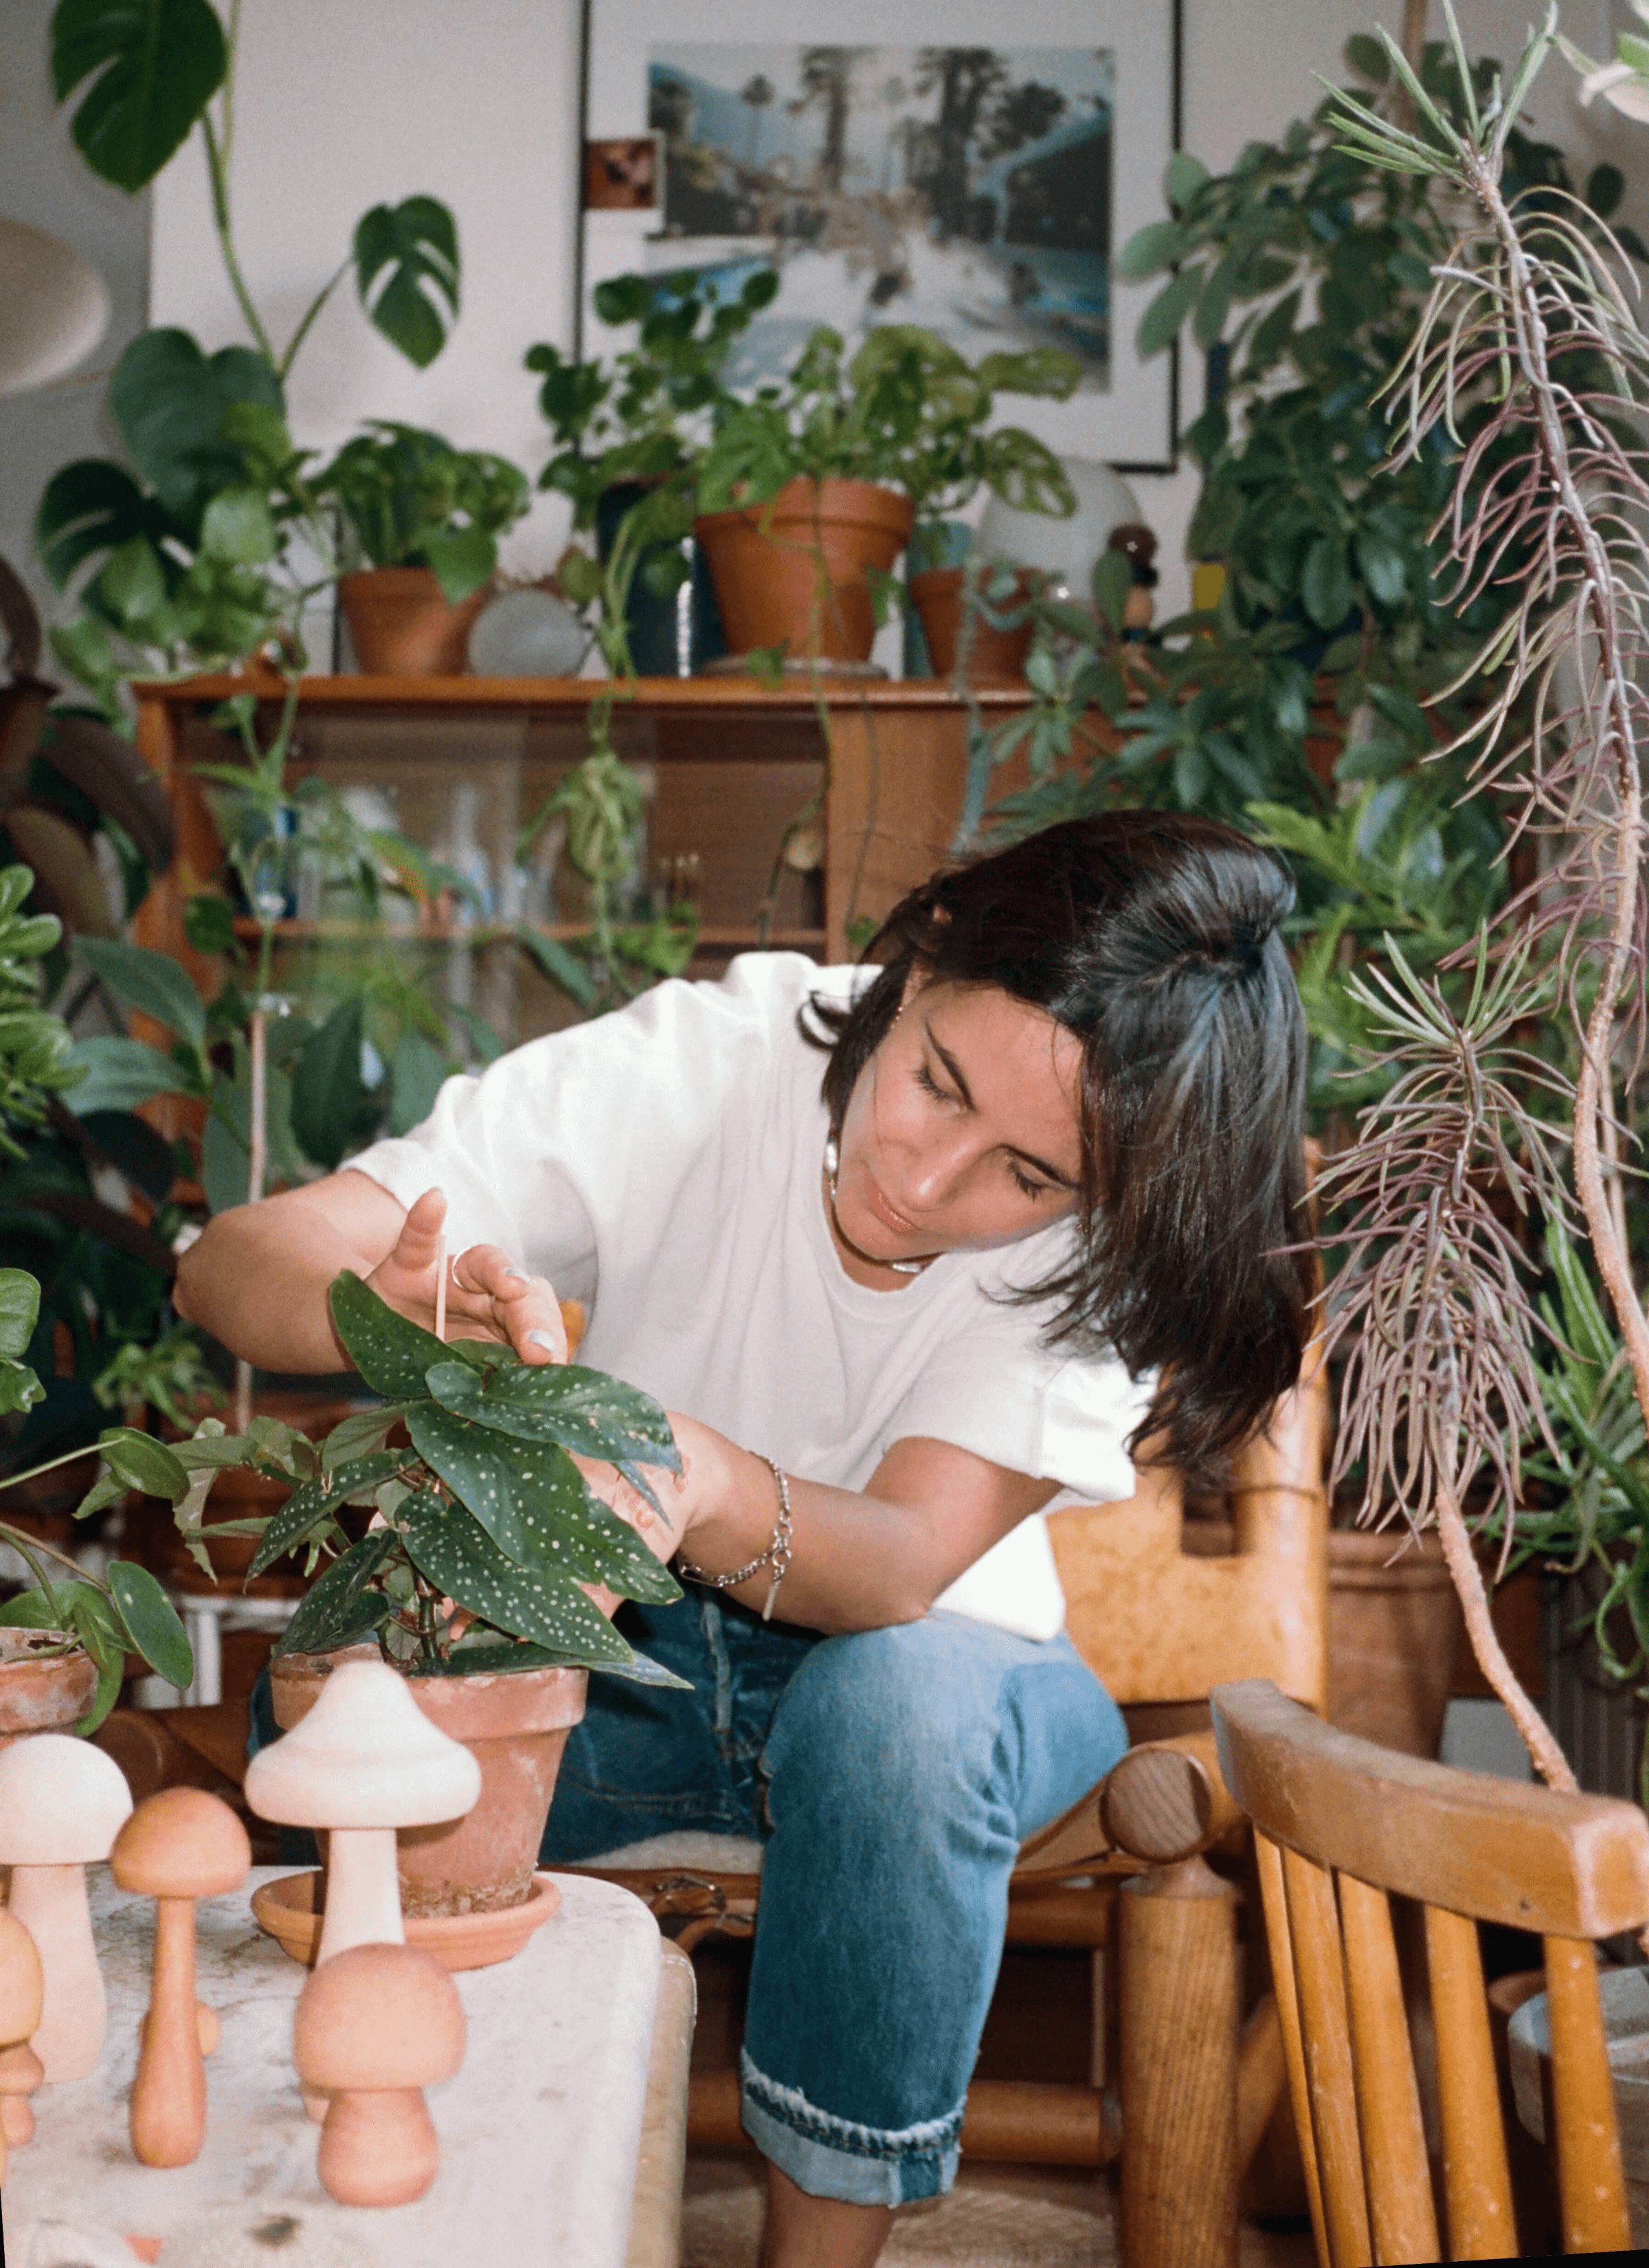 Leslie David takes care of a pot of plant in her studio which are covered with a full collection of plants in the room. And there are some mushroom-shaped wooden decorations on the table.